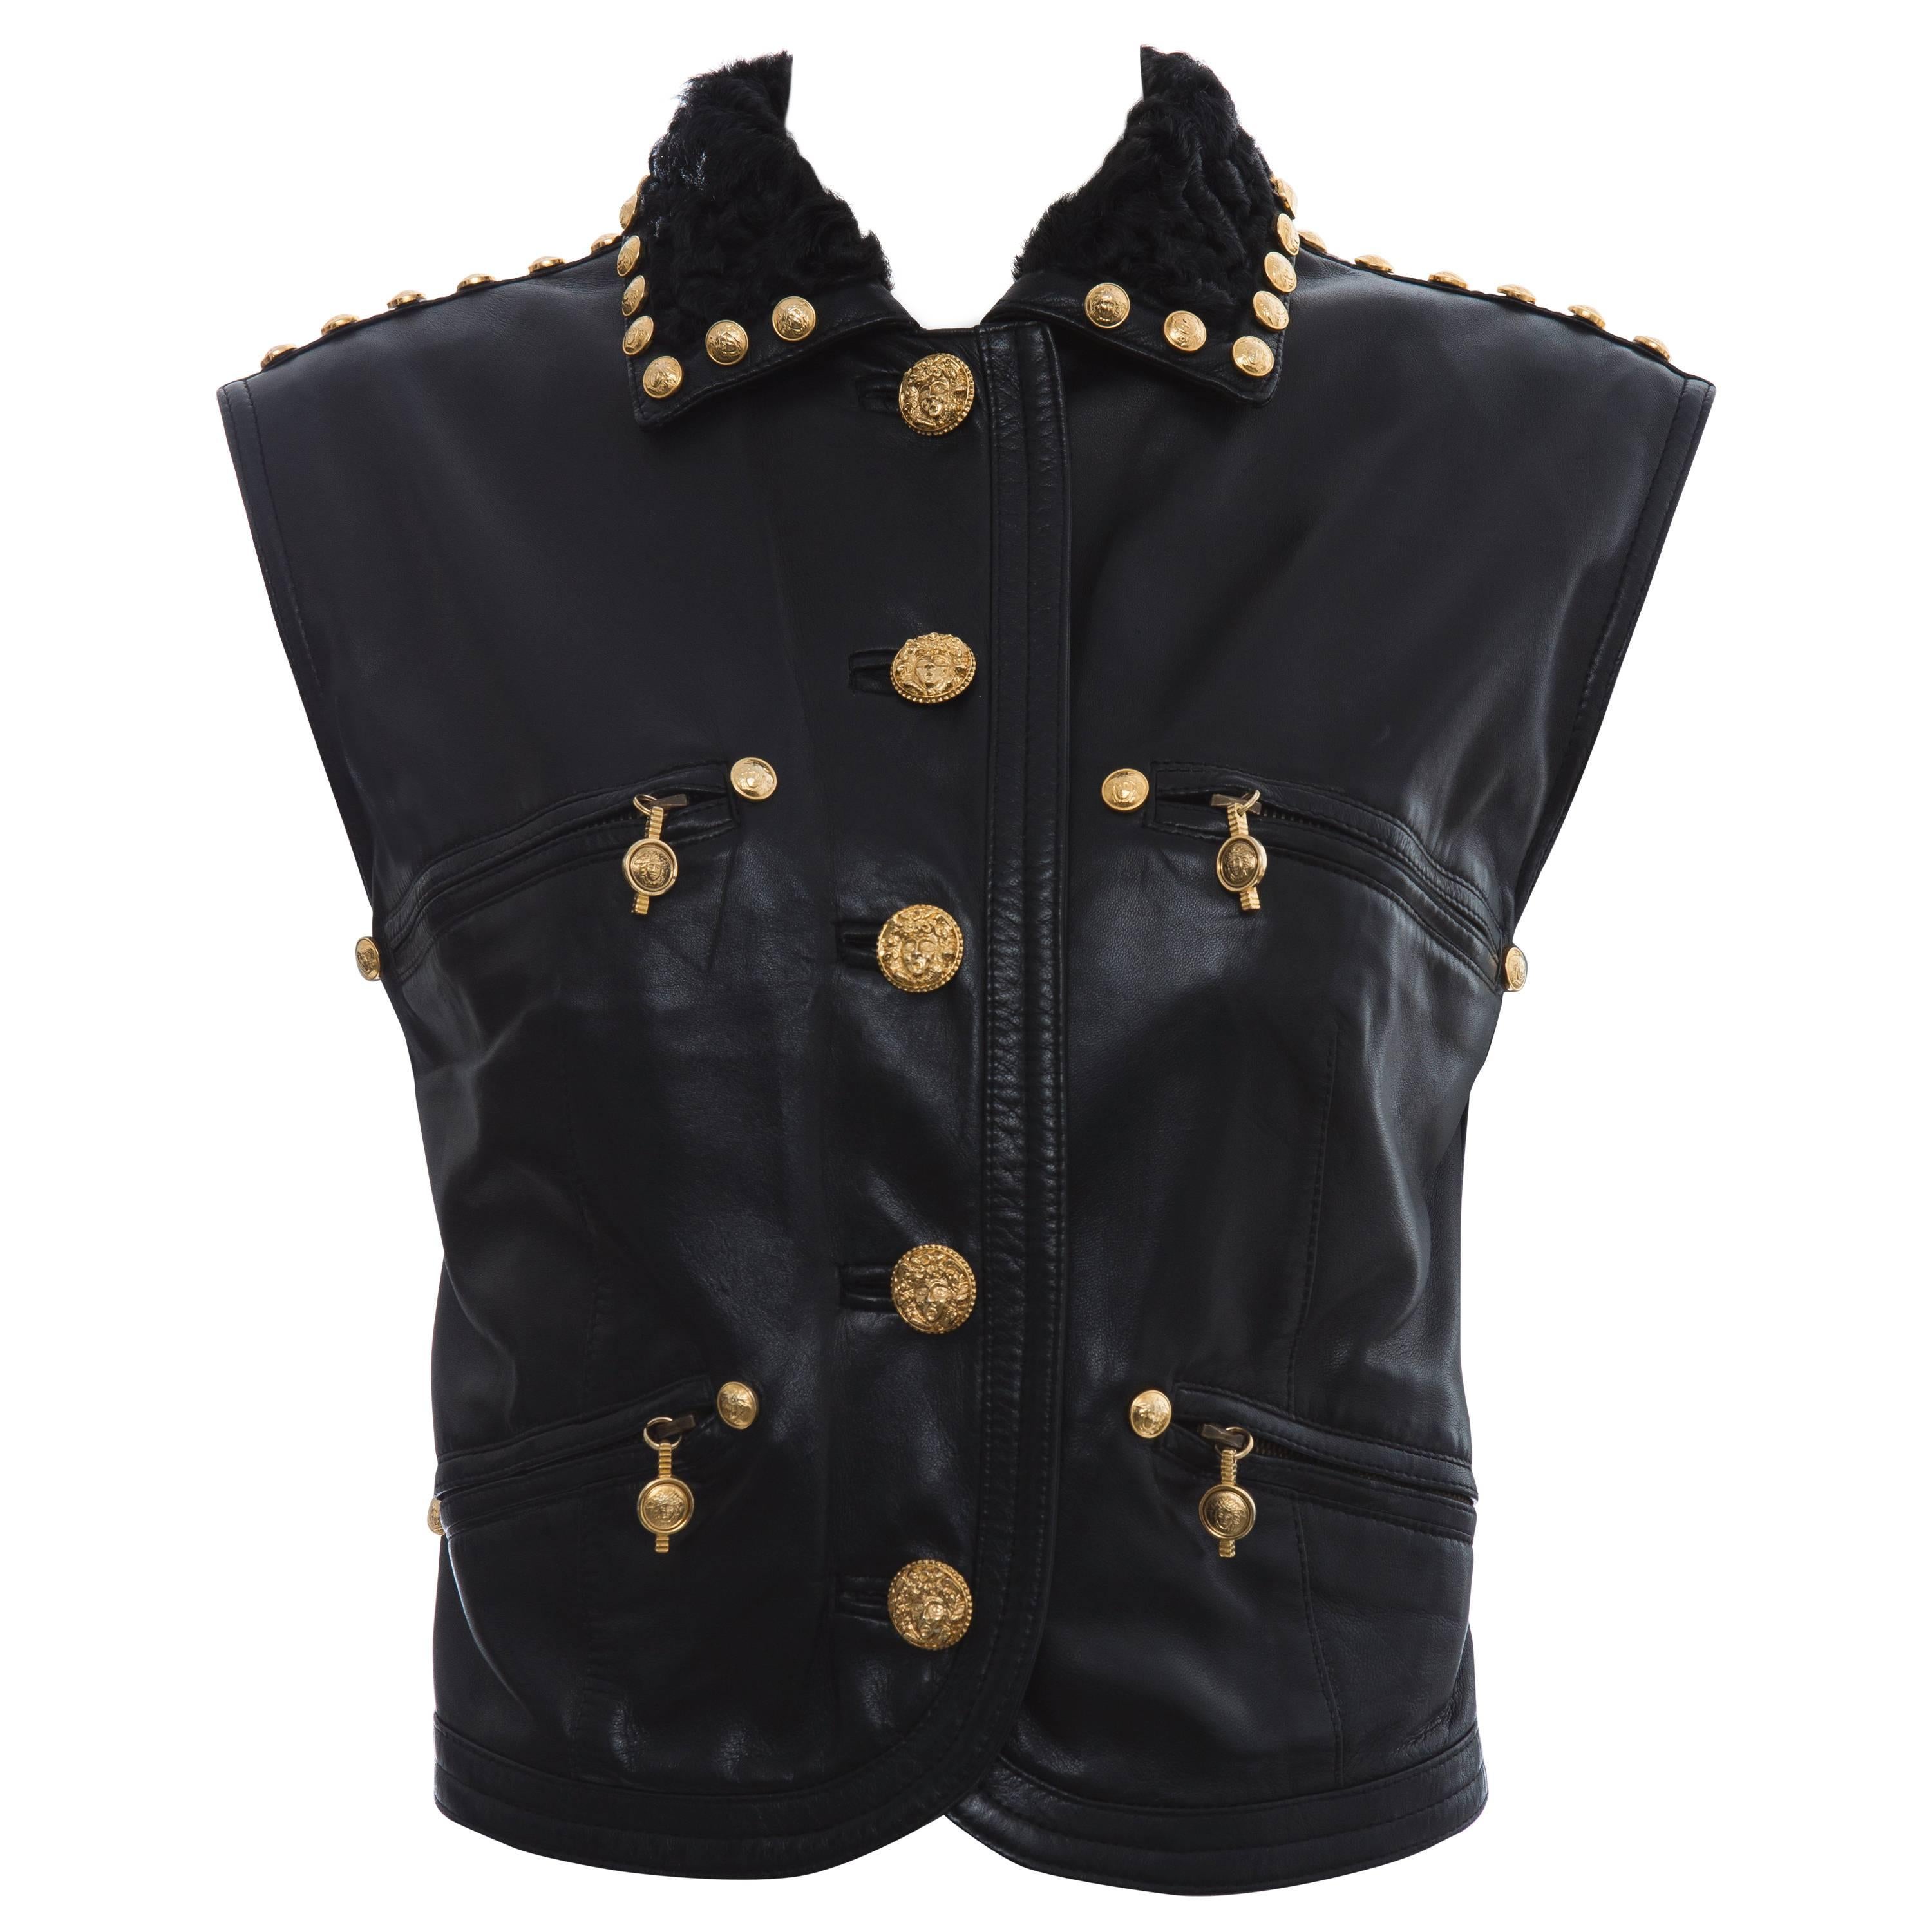 Gianni Versace Black Studded Leather Vest With Persian Lamb Collar, Circa 1990's